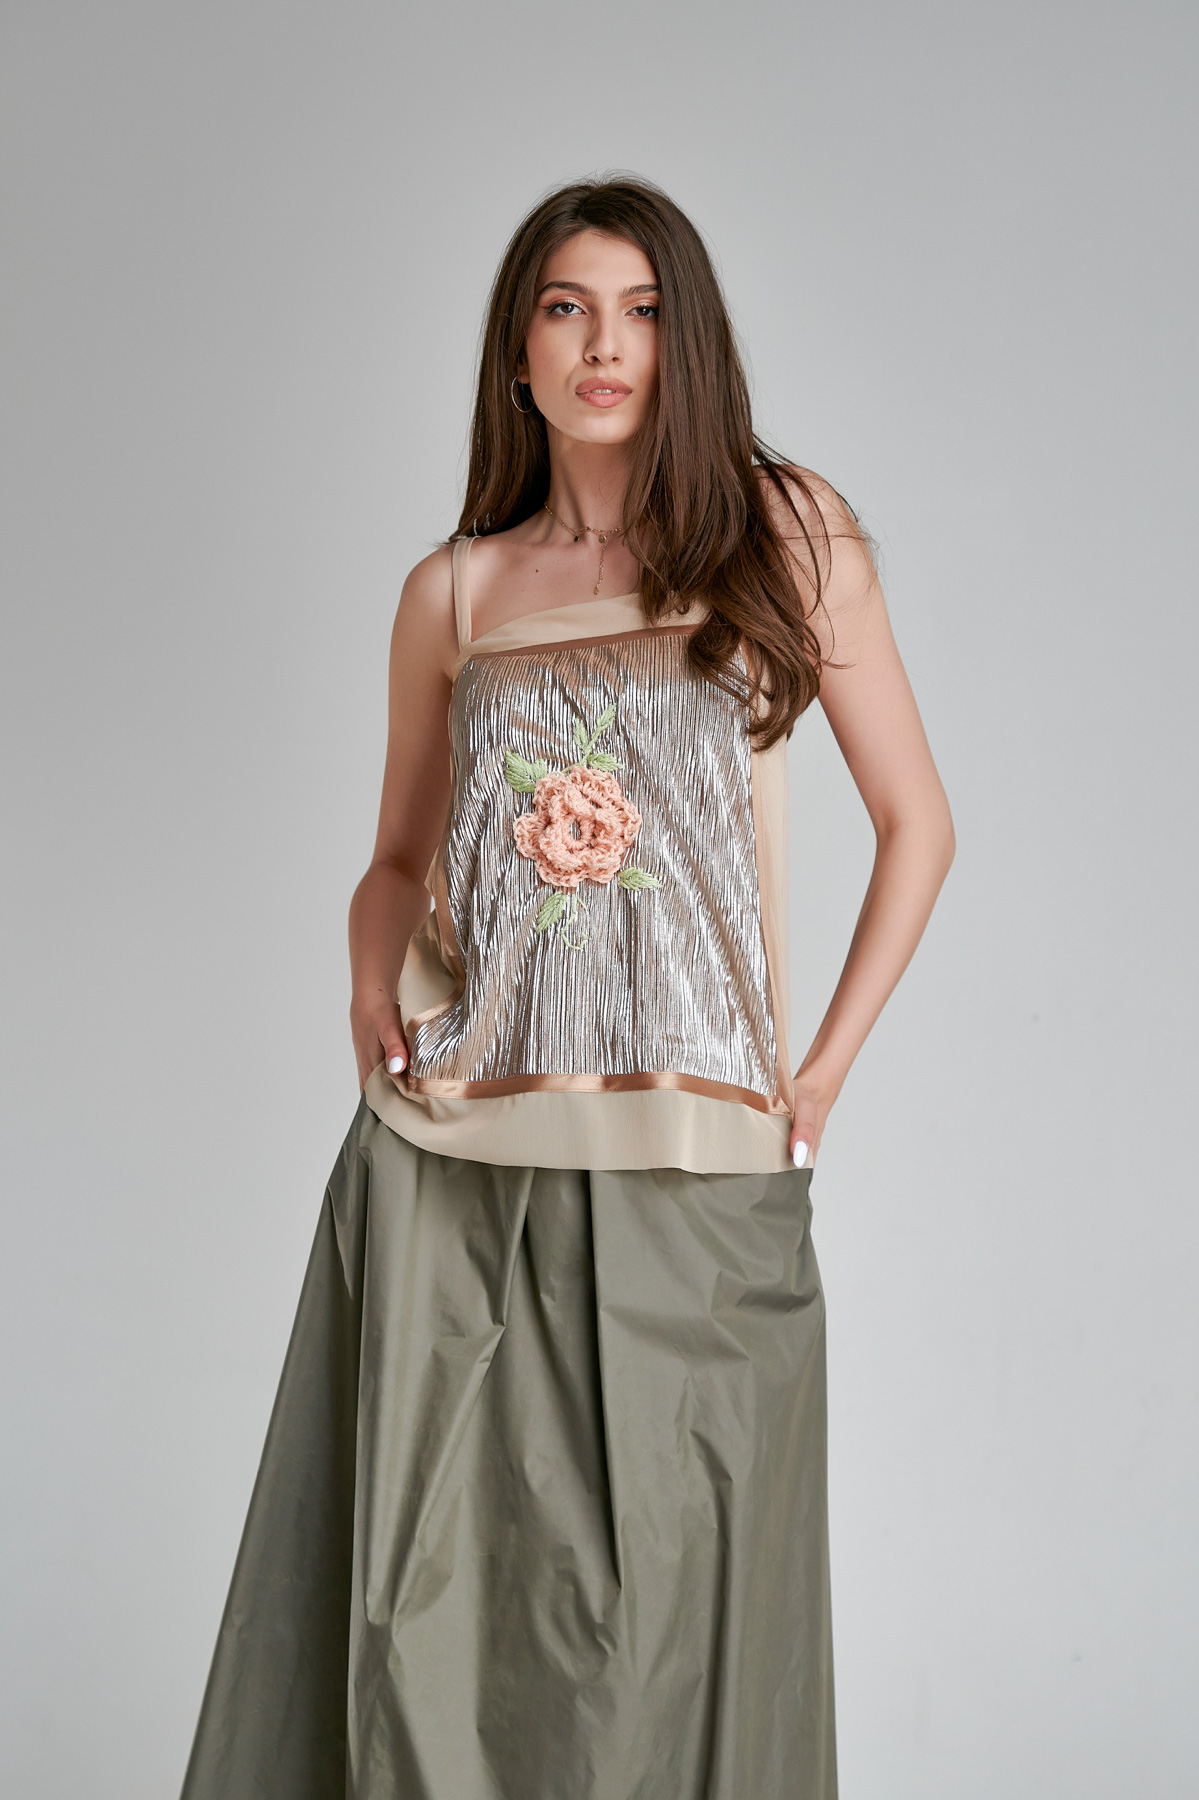 AXEL top beige with spaghetti straps and floral embroidery. Natural fabrics, original design, handmade embroidery